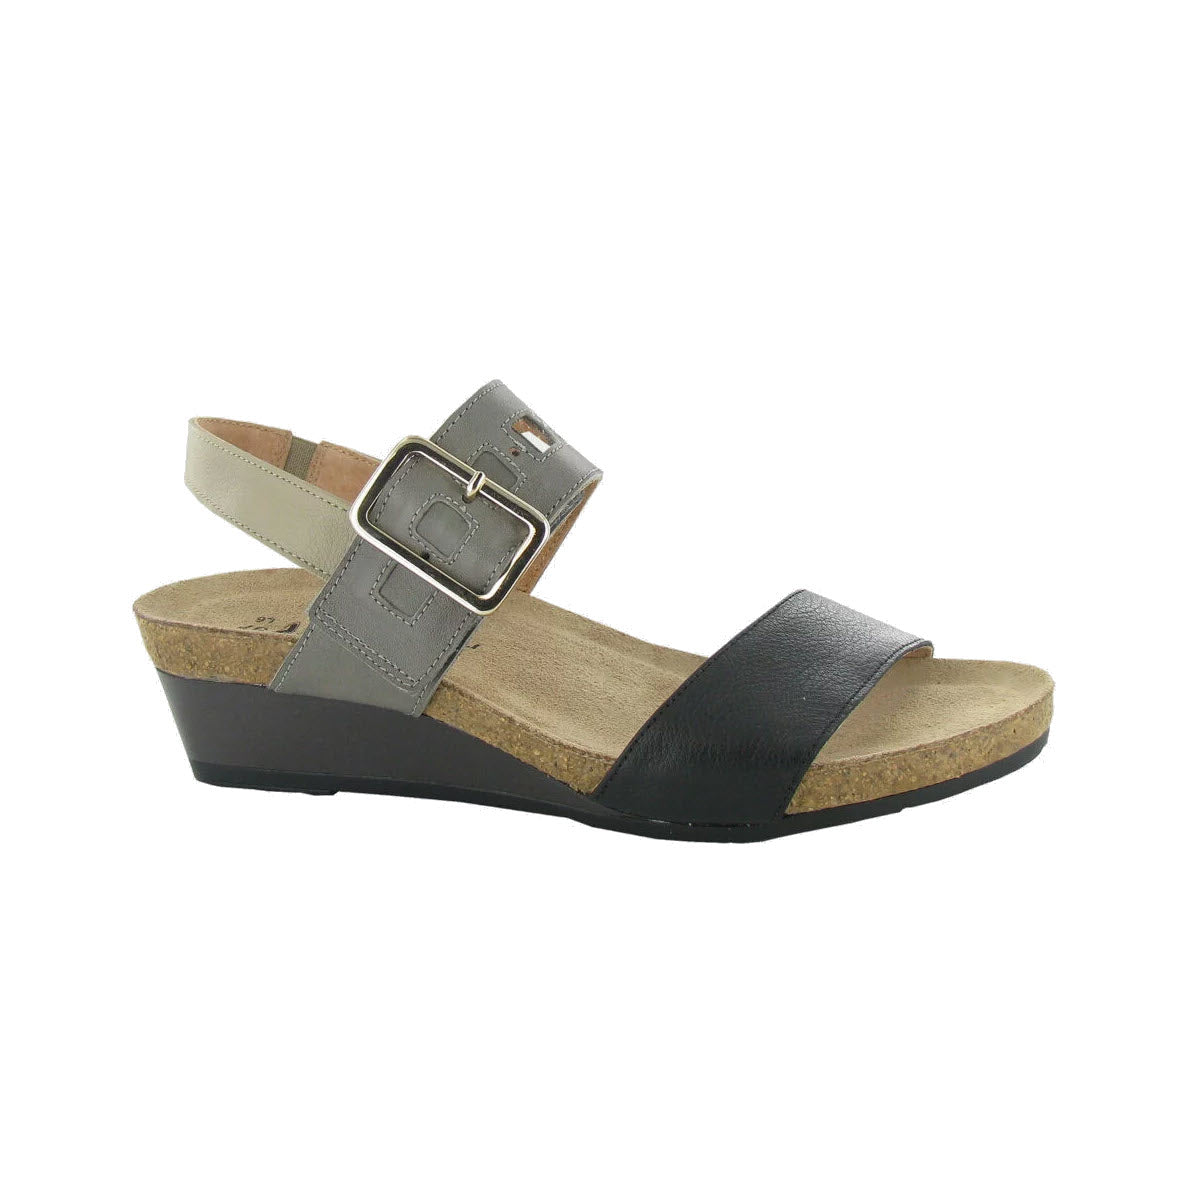 Black and gray Naot women's wedge sandals with a hook and loop closure, displayed on a white background.